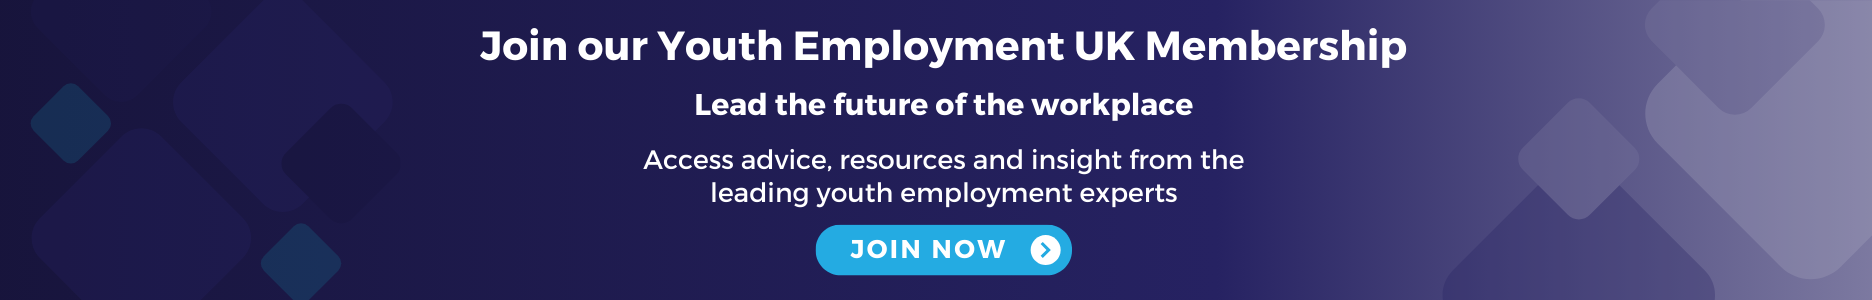 Join the Youth Employment UK Membership banner.